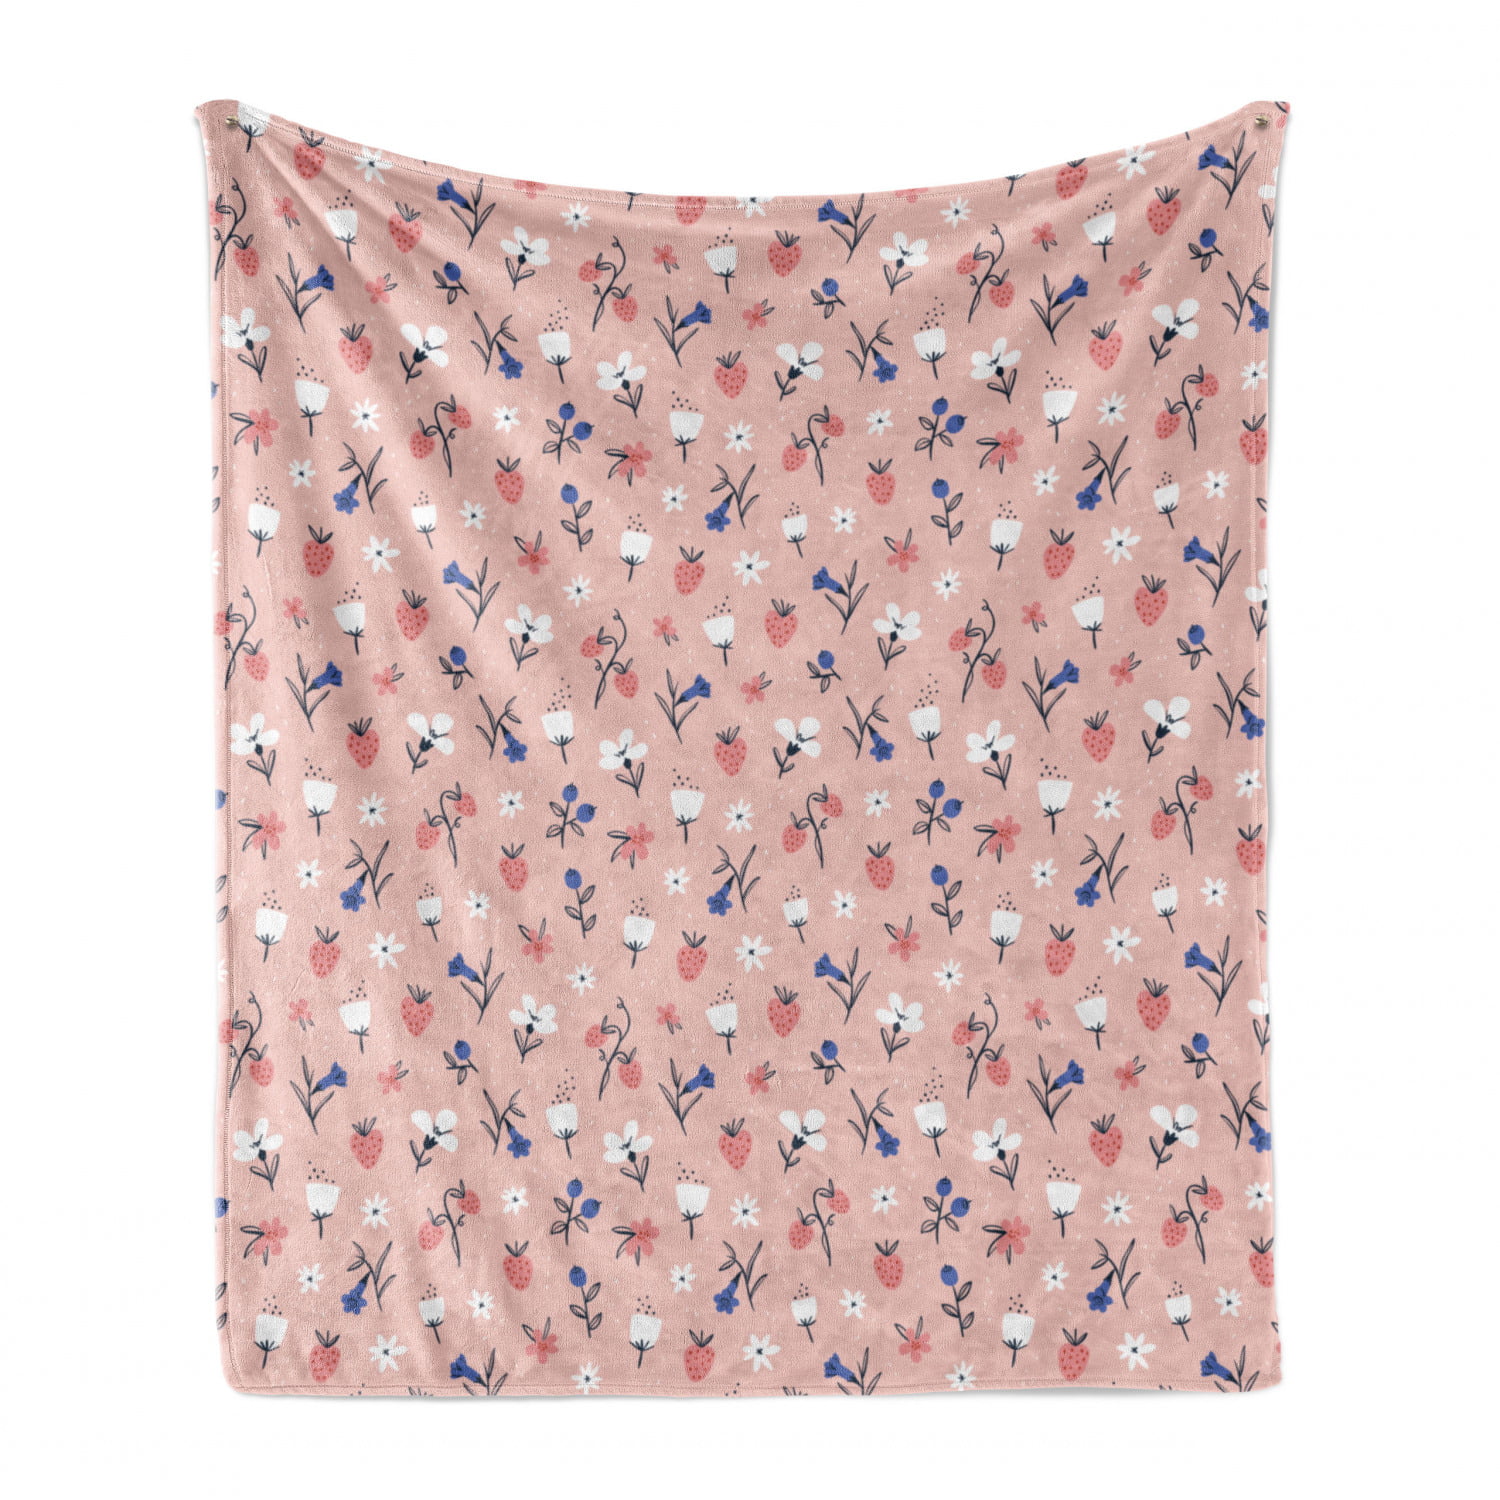 Cozy Plush for Indoor and Outdoor Use 70 x 90 Violet Blue and Pale Pink Pastel Blossoms Along Strawberries Berry Bouquets Forest Essence Ambesonne Botanic Soft Flannel Fleece Throw Blanket